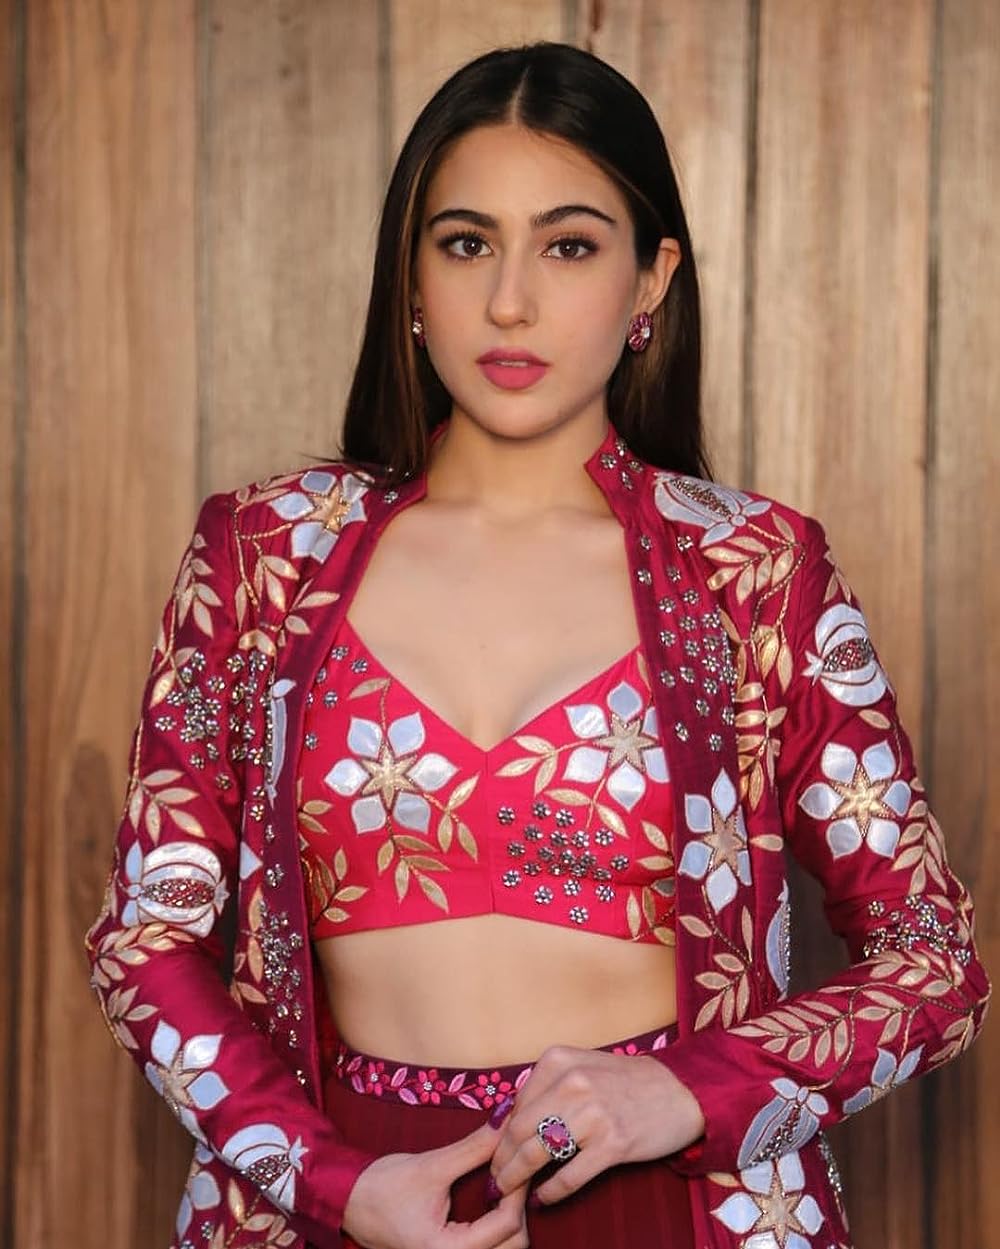 3rd Generation
Sara Ali Khan has always had Bollywood dreams and debuted in the film Kedarnath, directed by Abhishek Kapoor. Simmba, an action film directed by Rohit Shetty, was his second release. She is still one of the most sought-after young actresses today, with a lot of films under her belt.